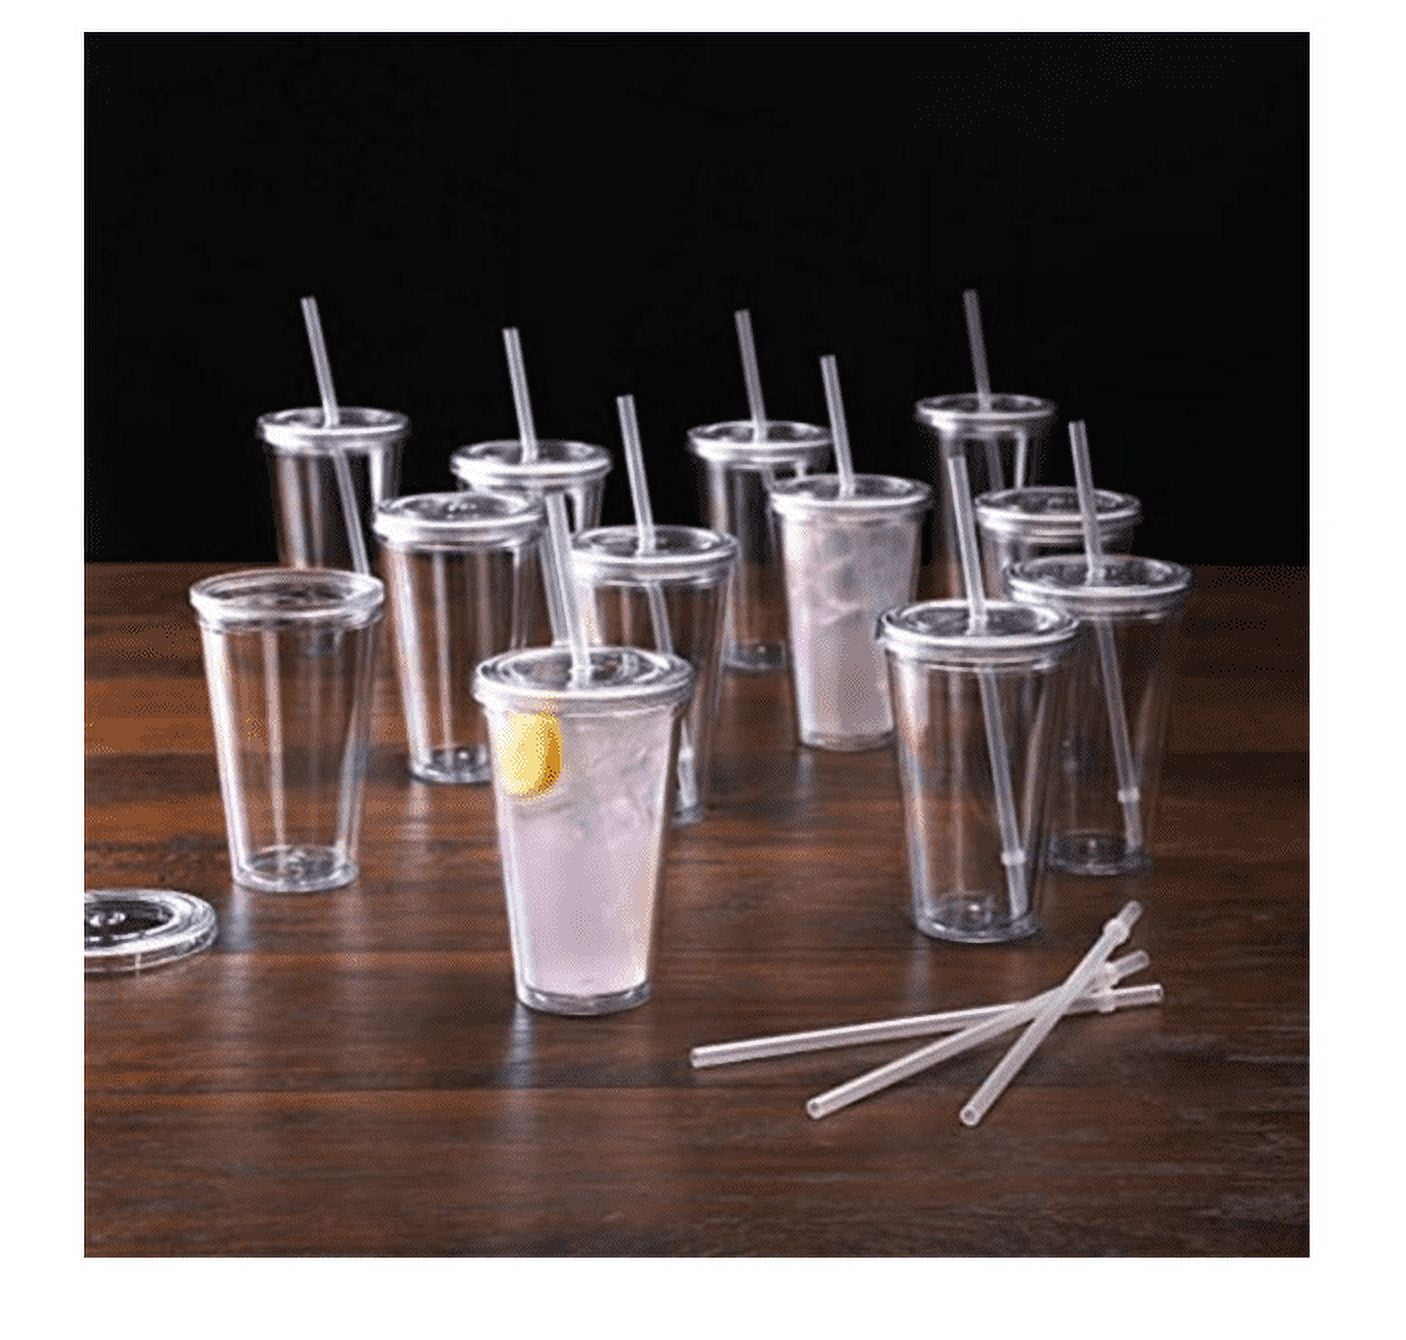 Tumblers with Lids and Straws.16 oz Clear Pastel Colored Plastic Acrylic Travel Tumblers Cups.Double Wall Insulated Matte Reusable Tumblers Bulk for